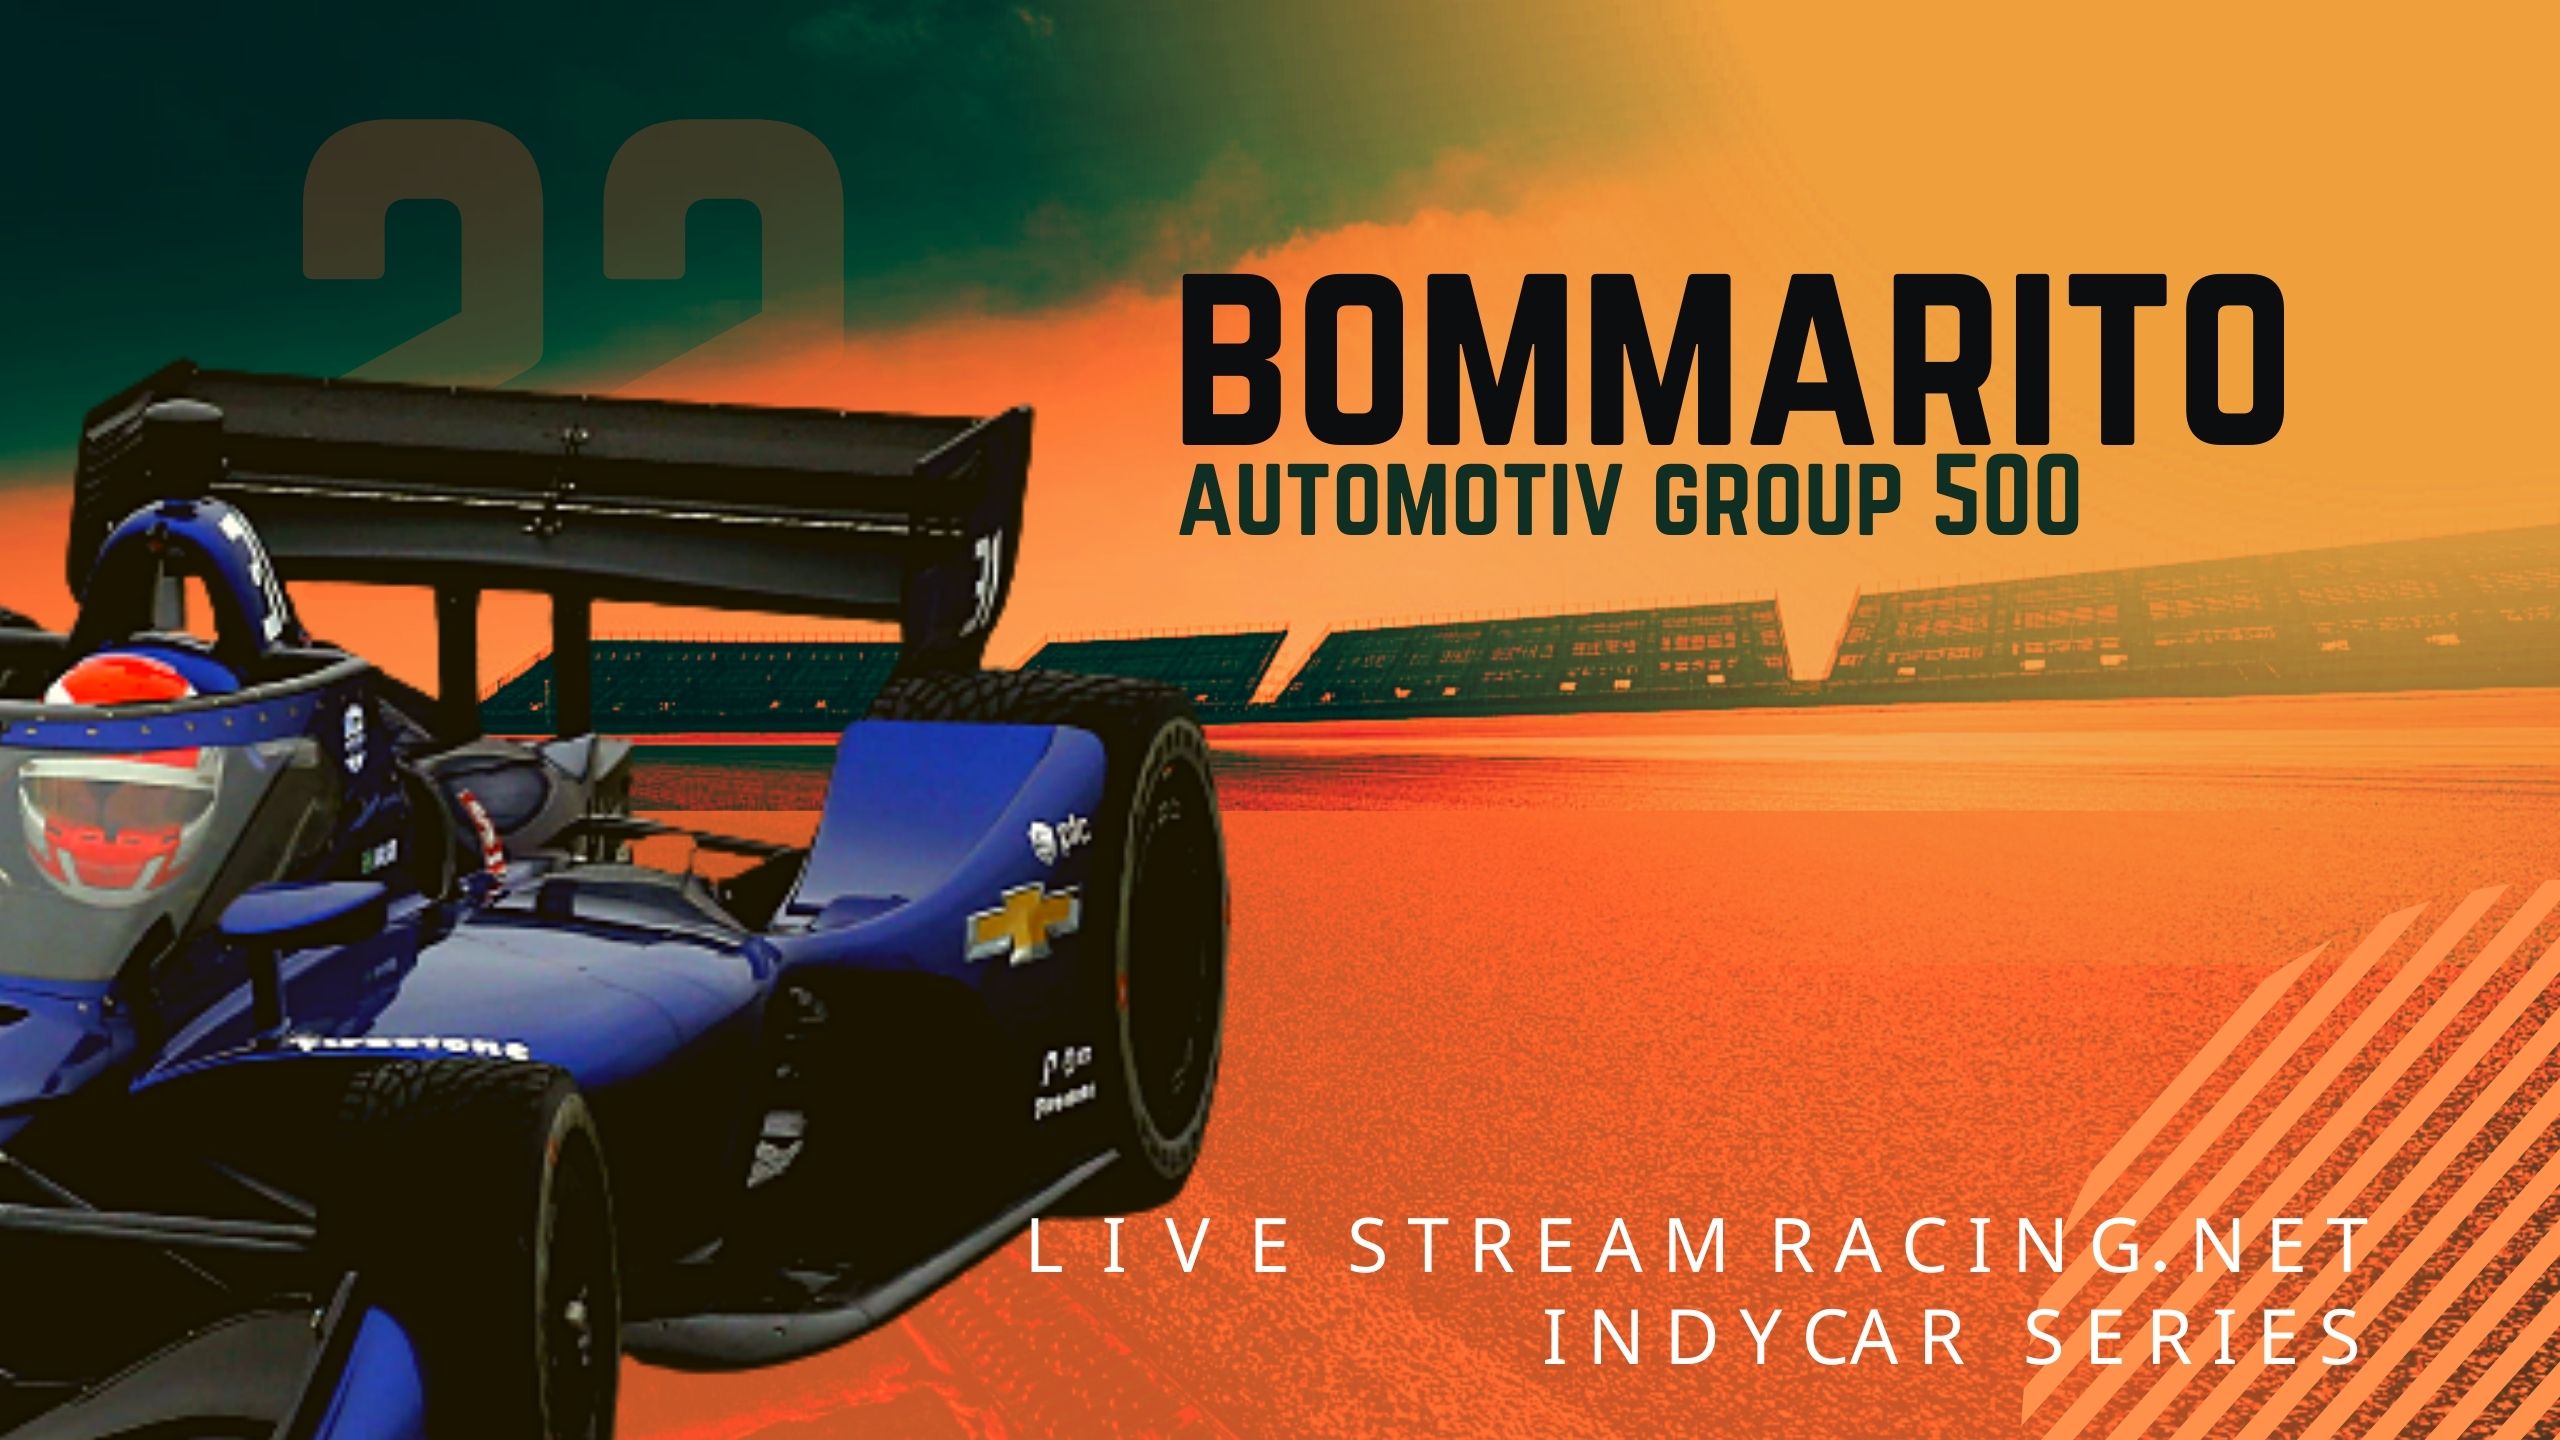 Bommarito Automotive Group 500 Indycar 2022 Live Stream | Race Replay slider